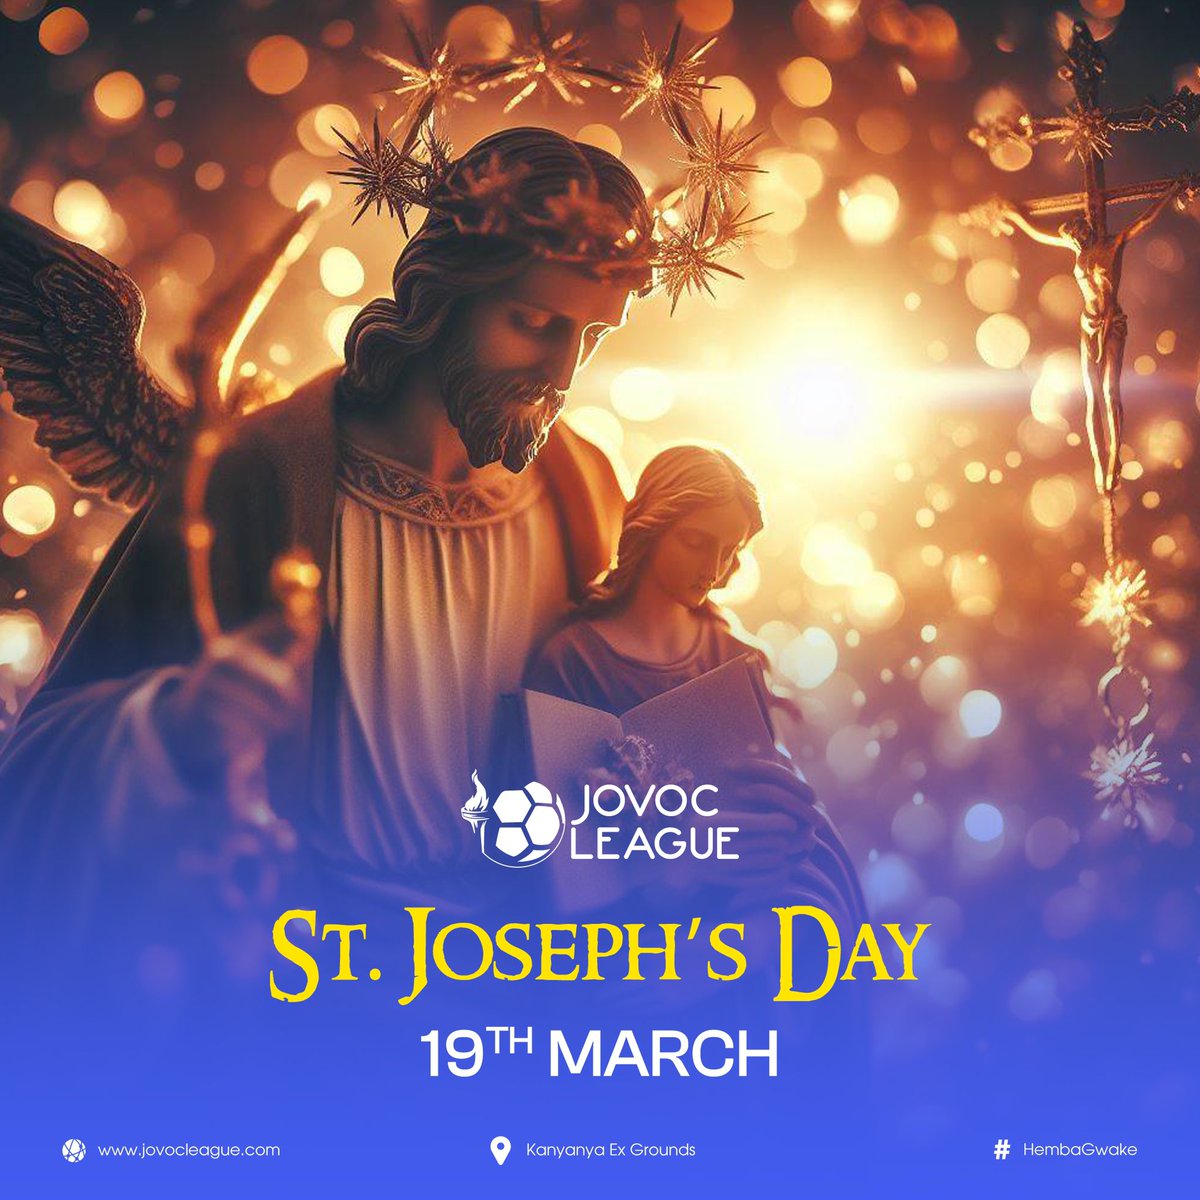 #HappyFeastDay 
St. Joseph is revered for his righteousness, obedience to God, and his role as the protector of the Holy Family. 
It's a time to reflect on St Joseph's virtues and seek his intercession for guidance and protection
#JLSeasonIV